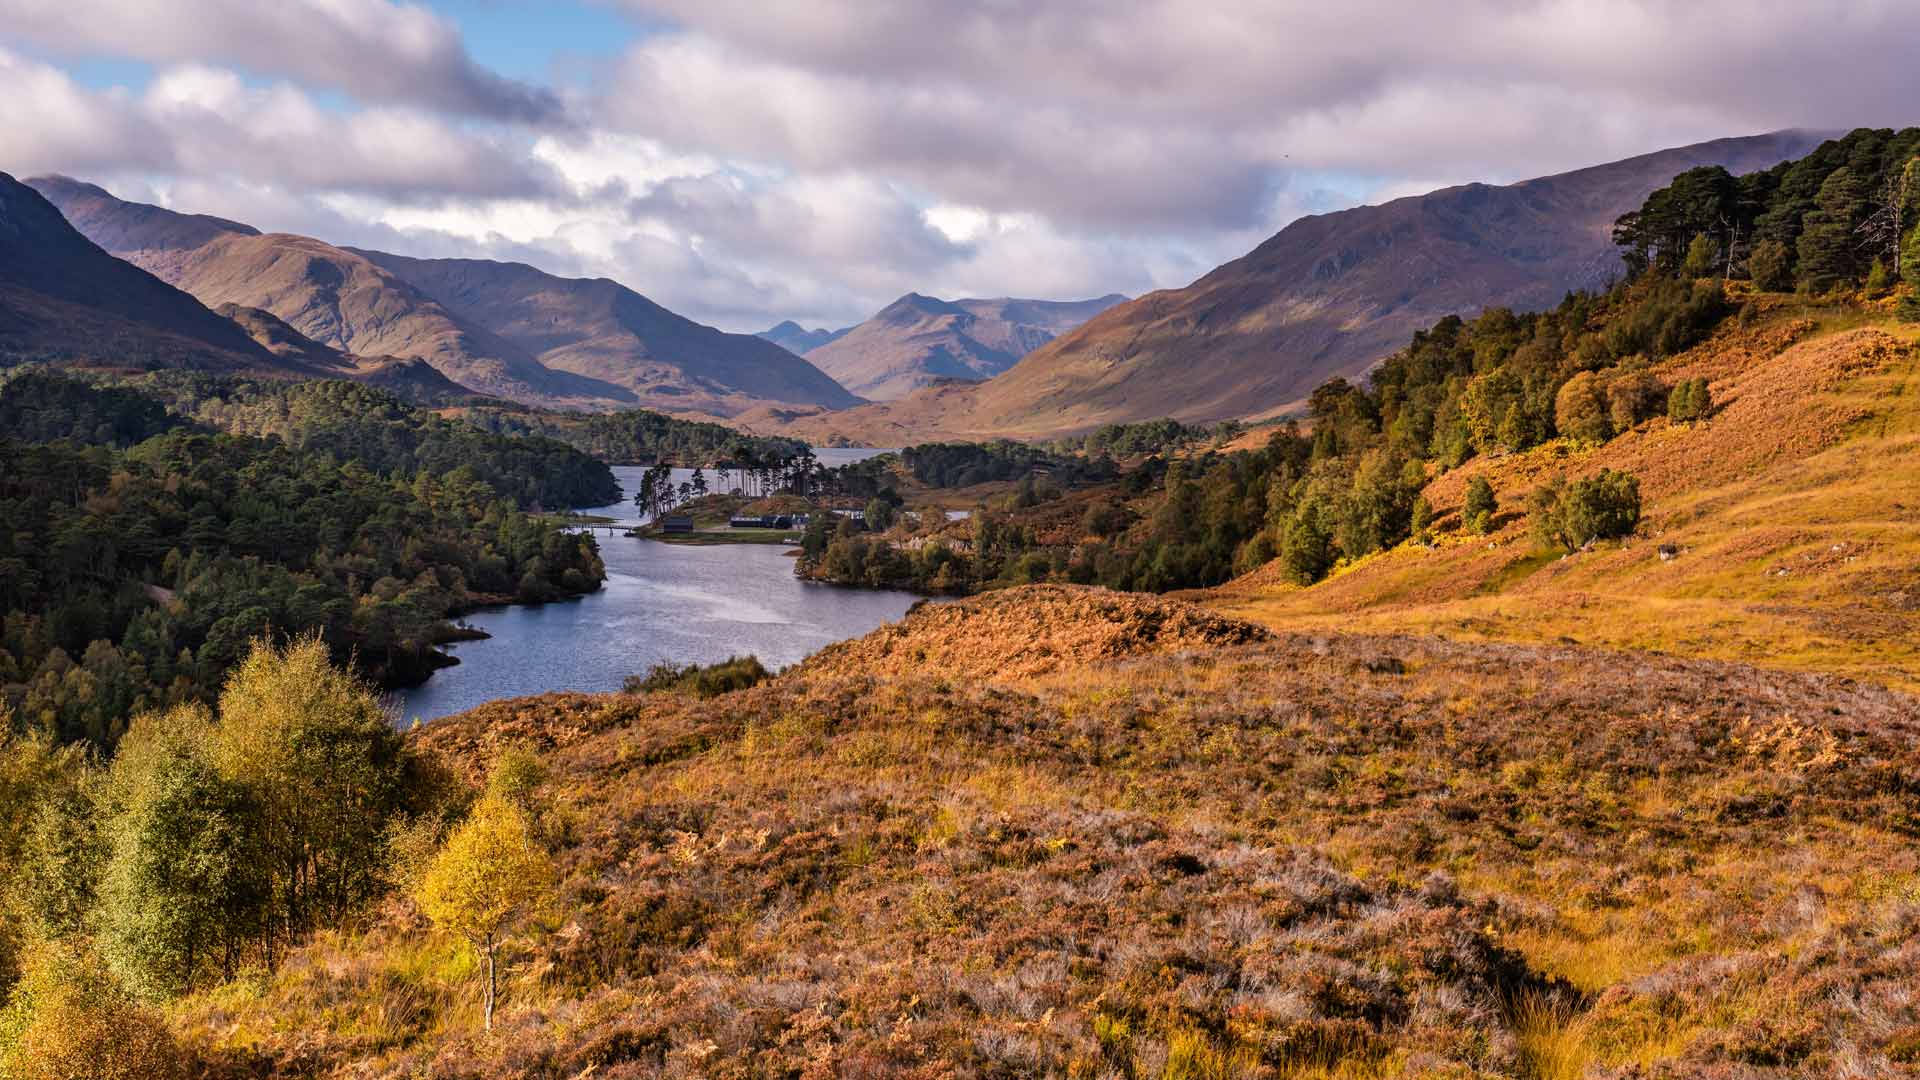 Loch and mountains of Glen Affric in Scotland